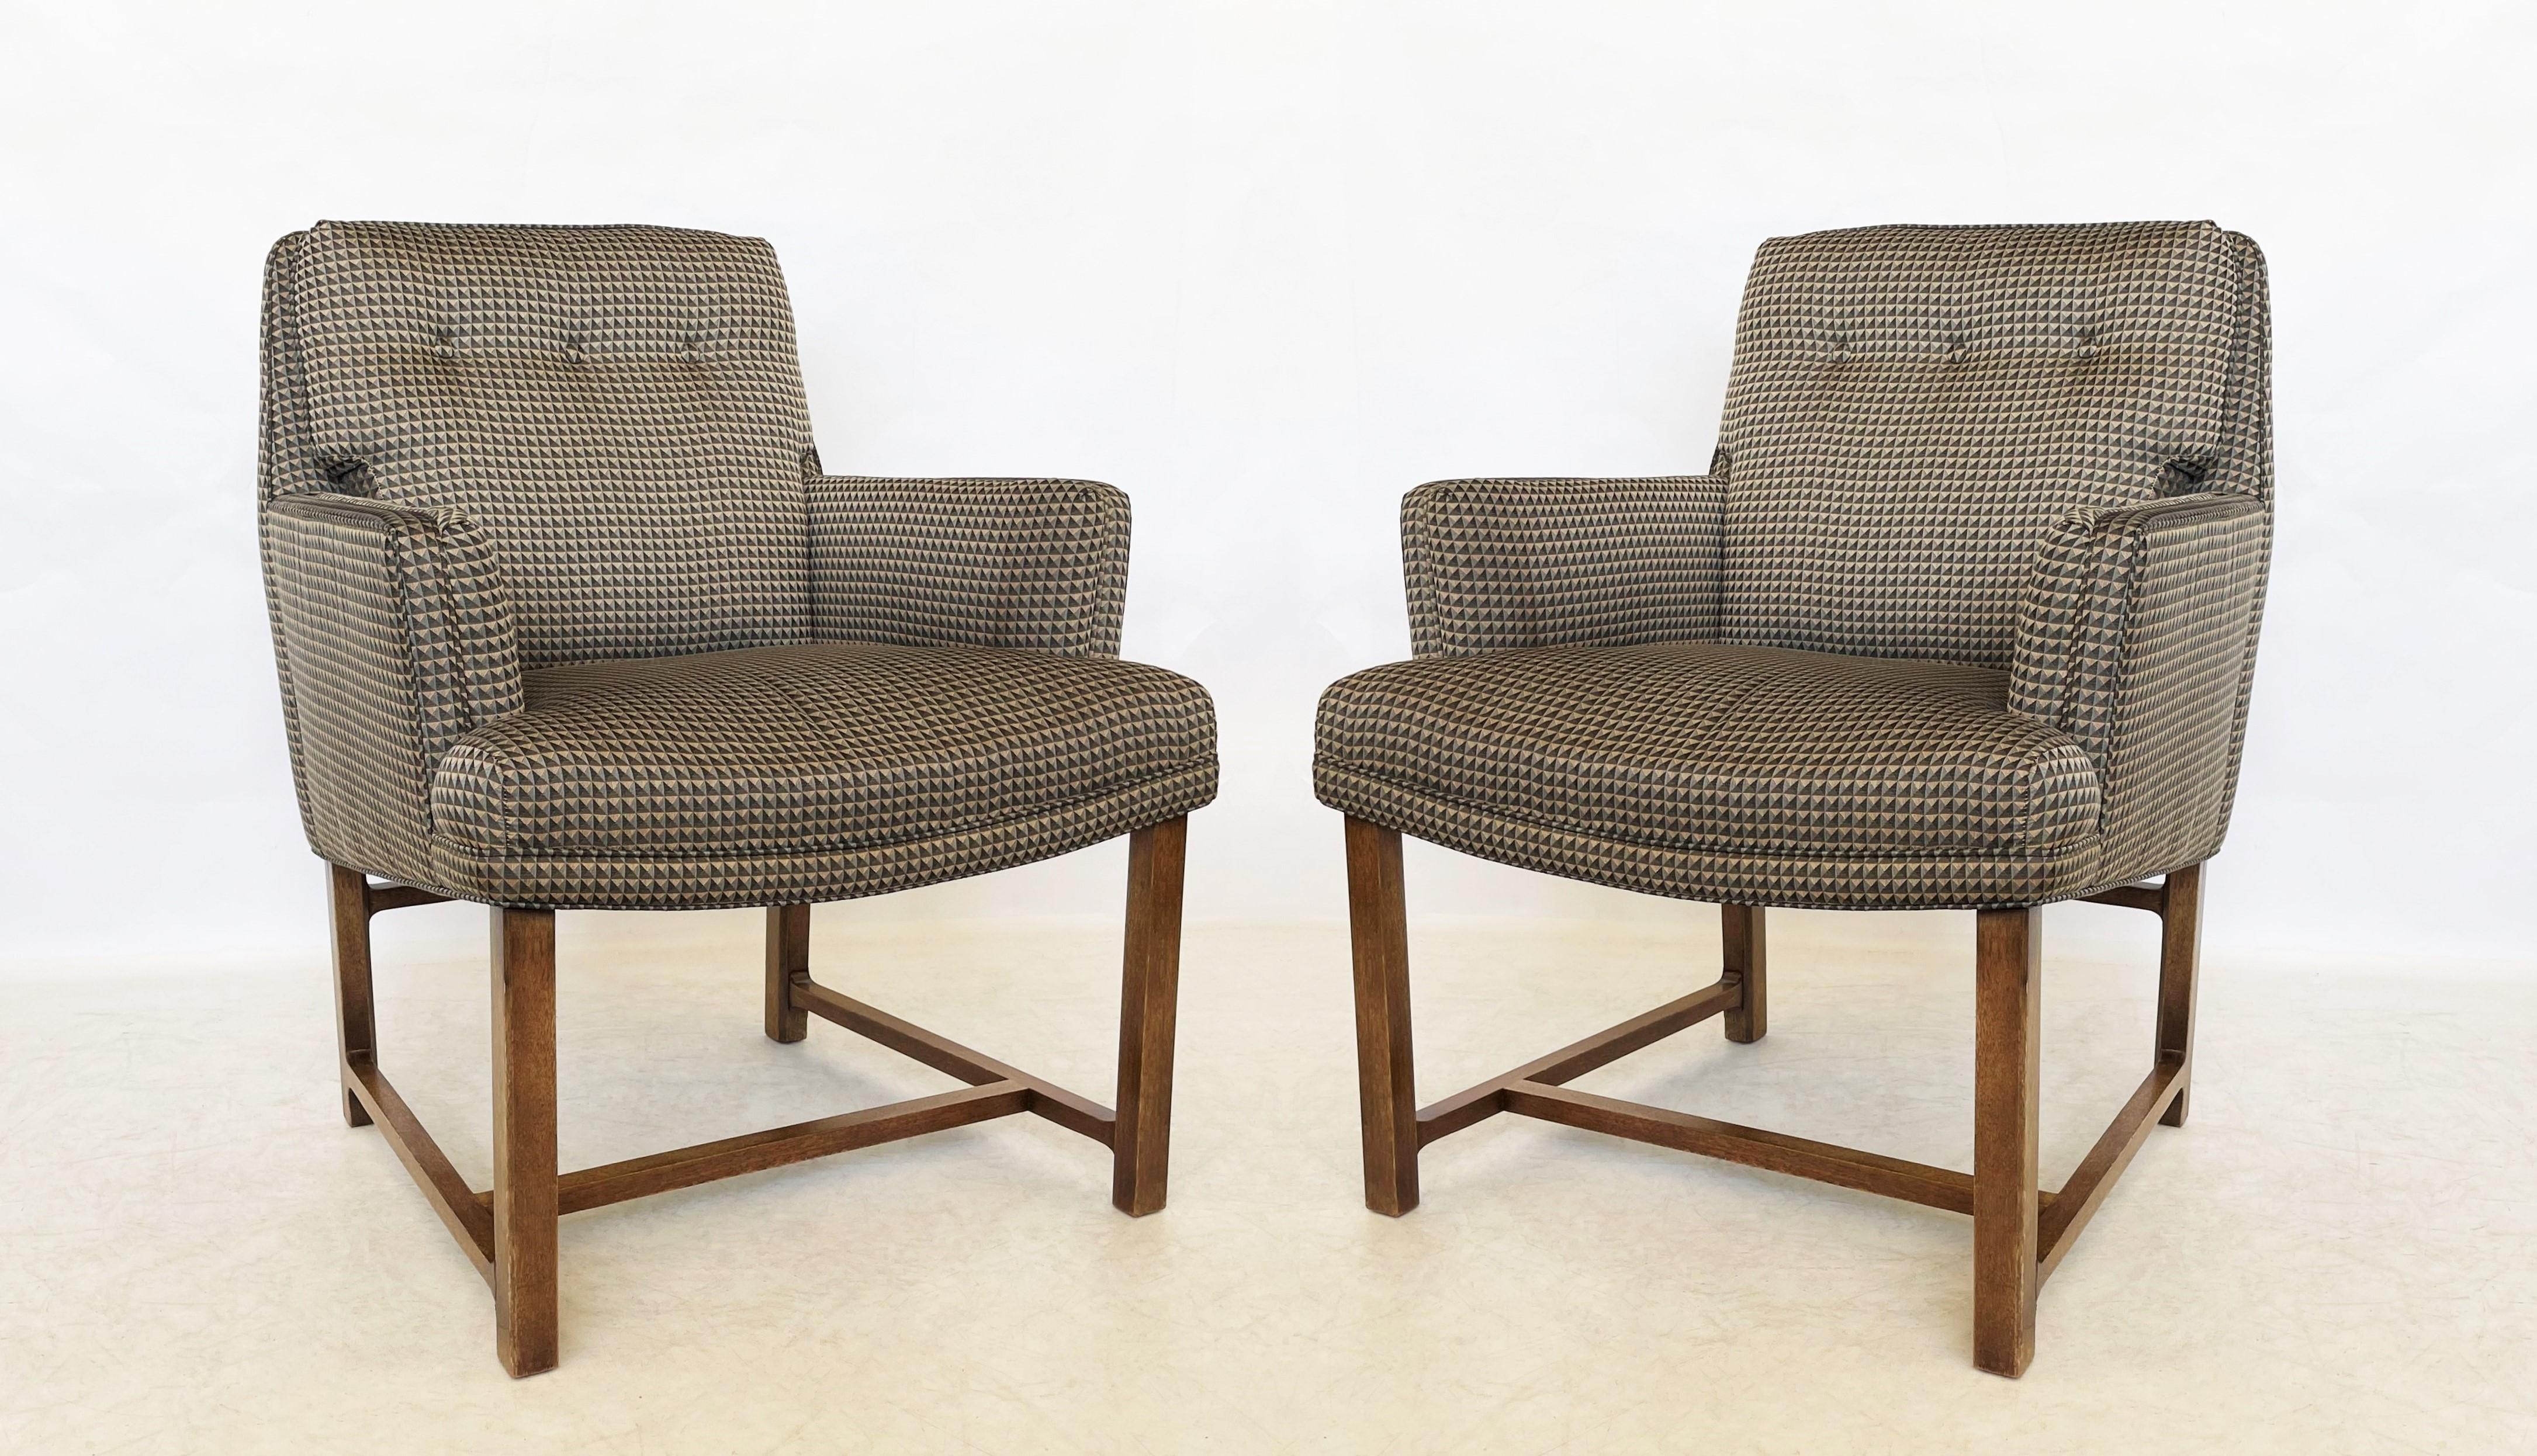 Exceptional designed pull-up lounge chairs model 971 designed by Edward Wormley for Dunbar’s 